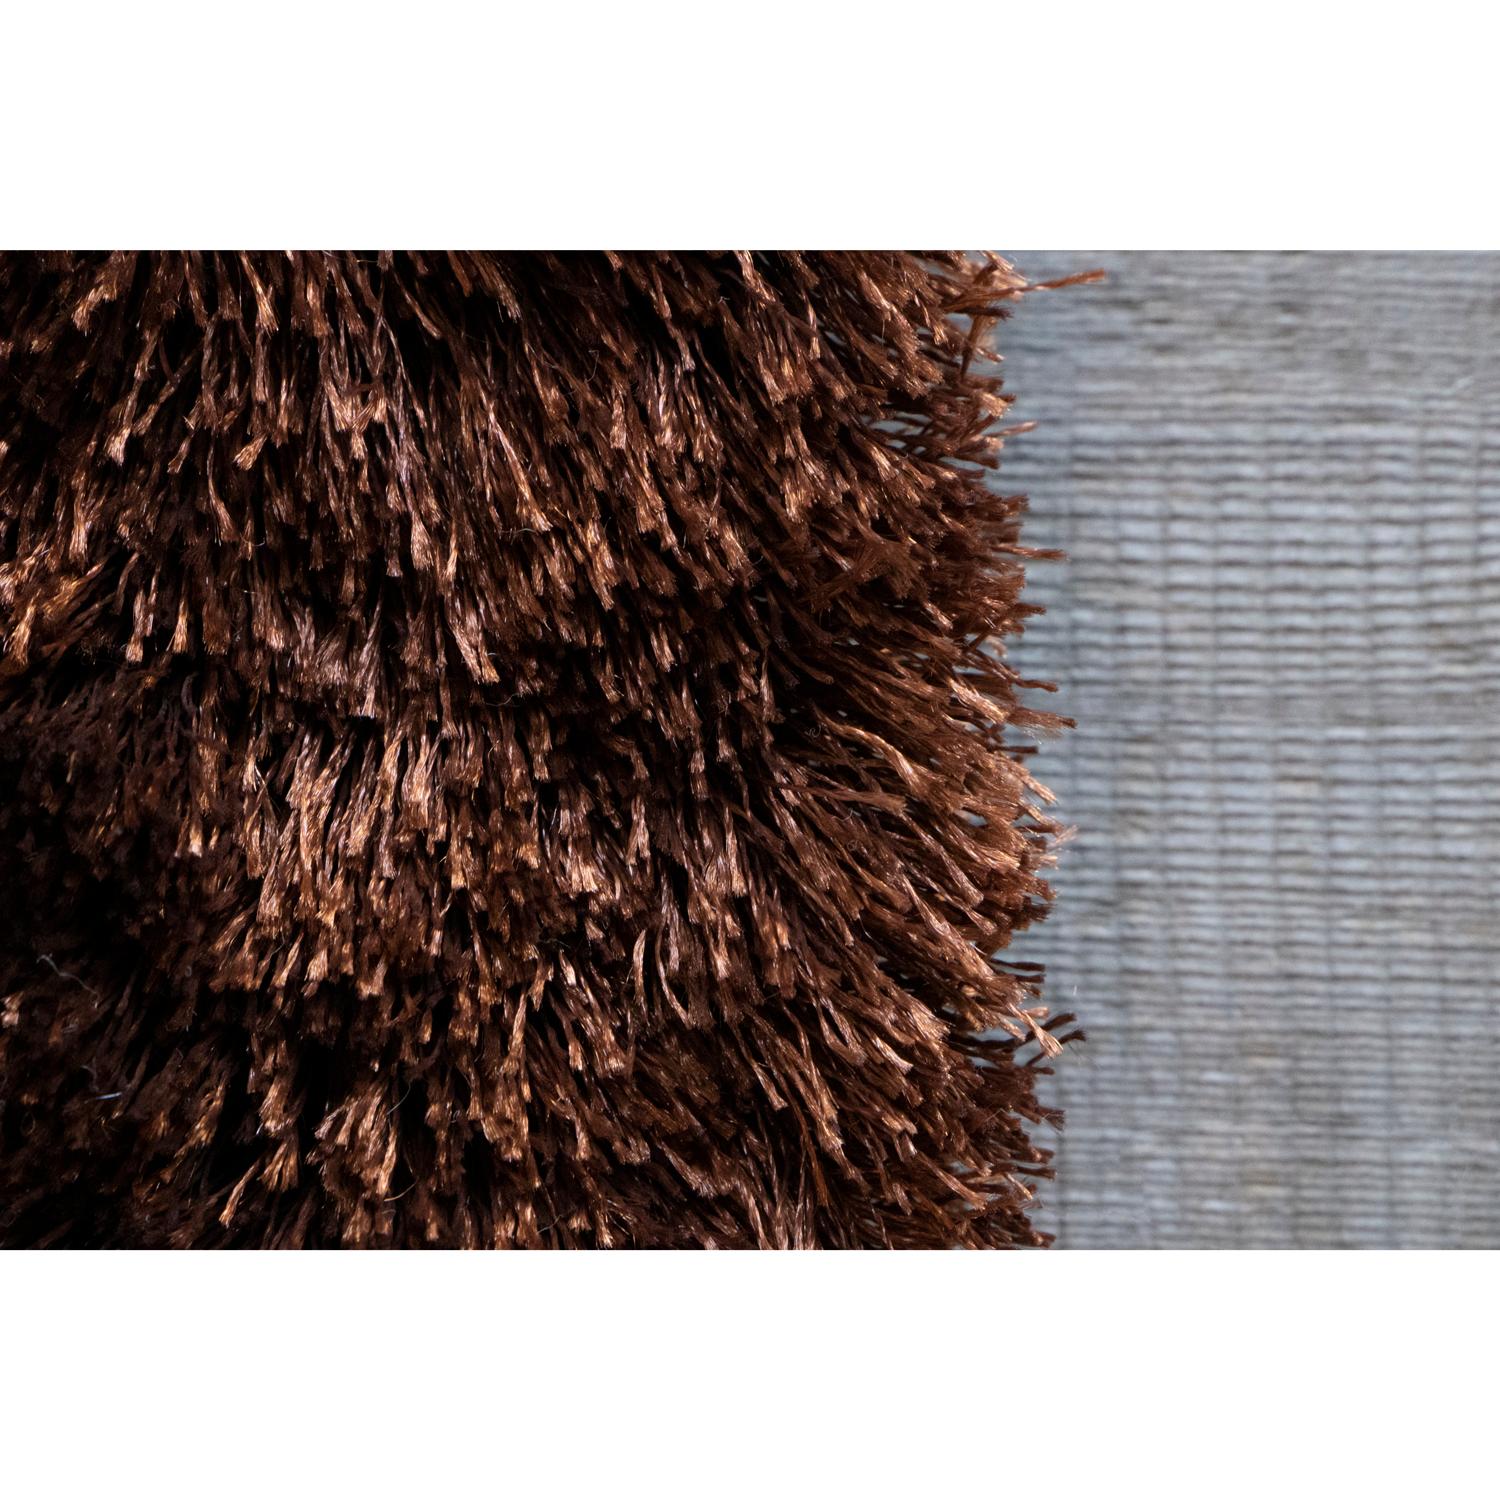 Contemporary Soft Cozy Design Brown Rug by Deanna Comellini In Stock 200x300 cm In New Condition For Sale In Bologna, IT